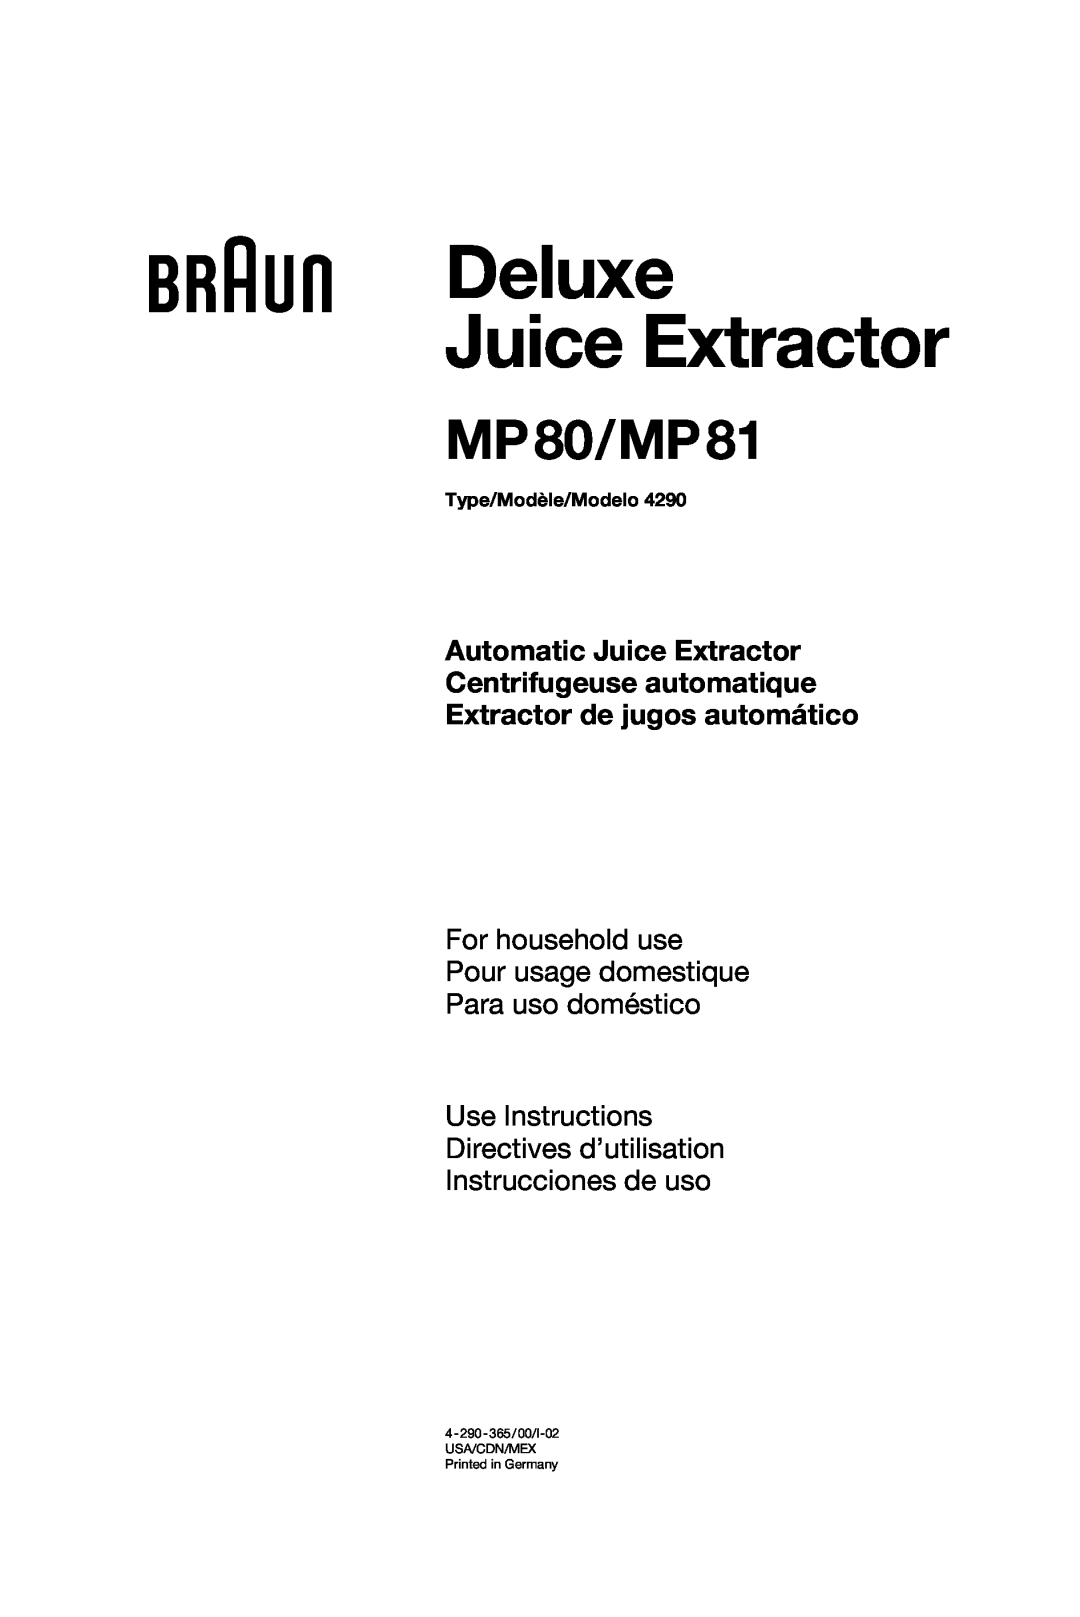 Braun MP80/MP81 manual Deluxe Juice Extractor, MP 80/MP, For household use Pour usage domestique Para uso doméstico 